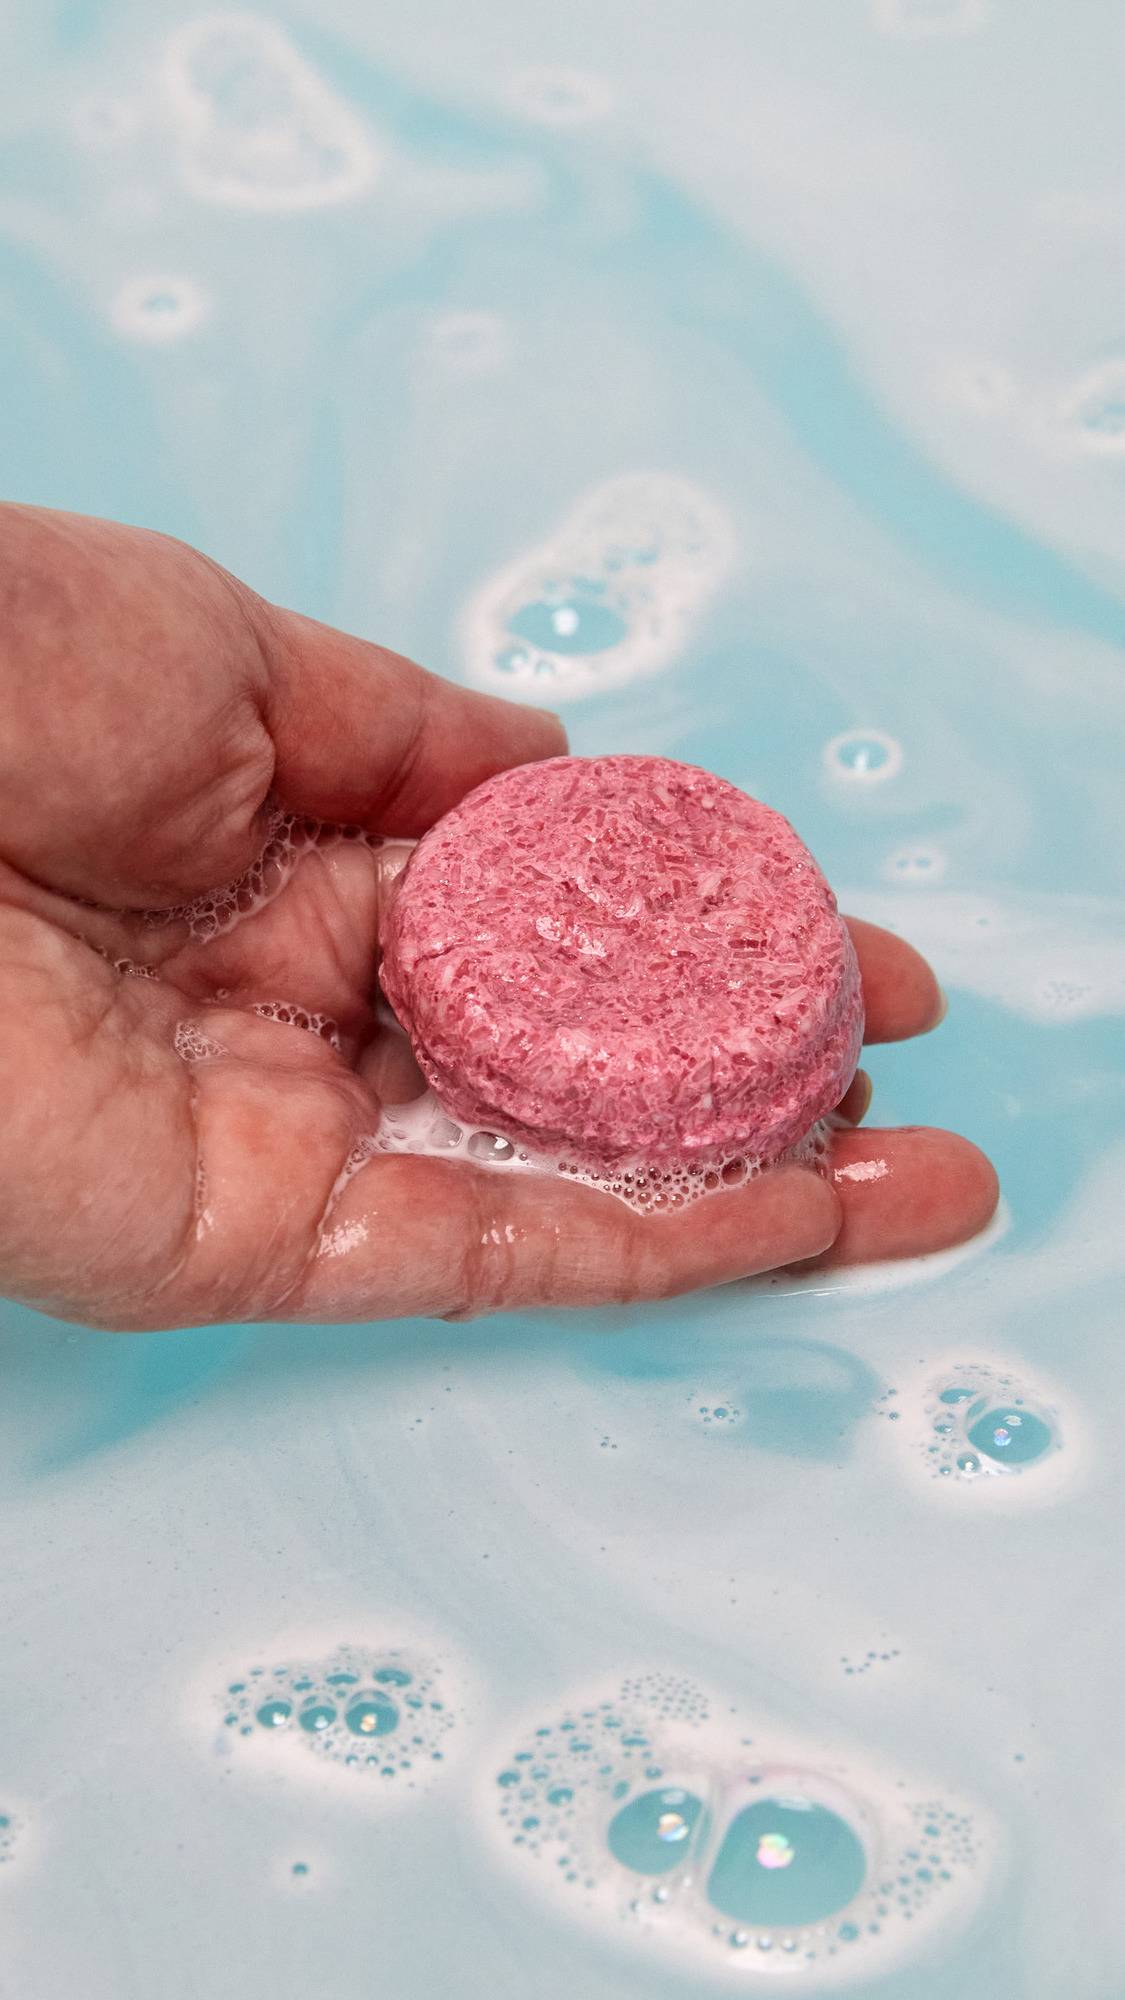 The Ickle Baby Bot bath bomb has completely dissolved in the water leaving behind a surprise mini reusable shampoo bar help by the model above sky blue waters. 